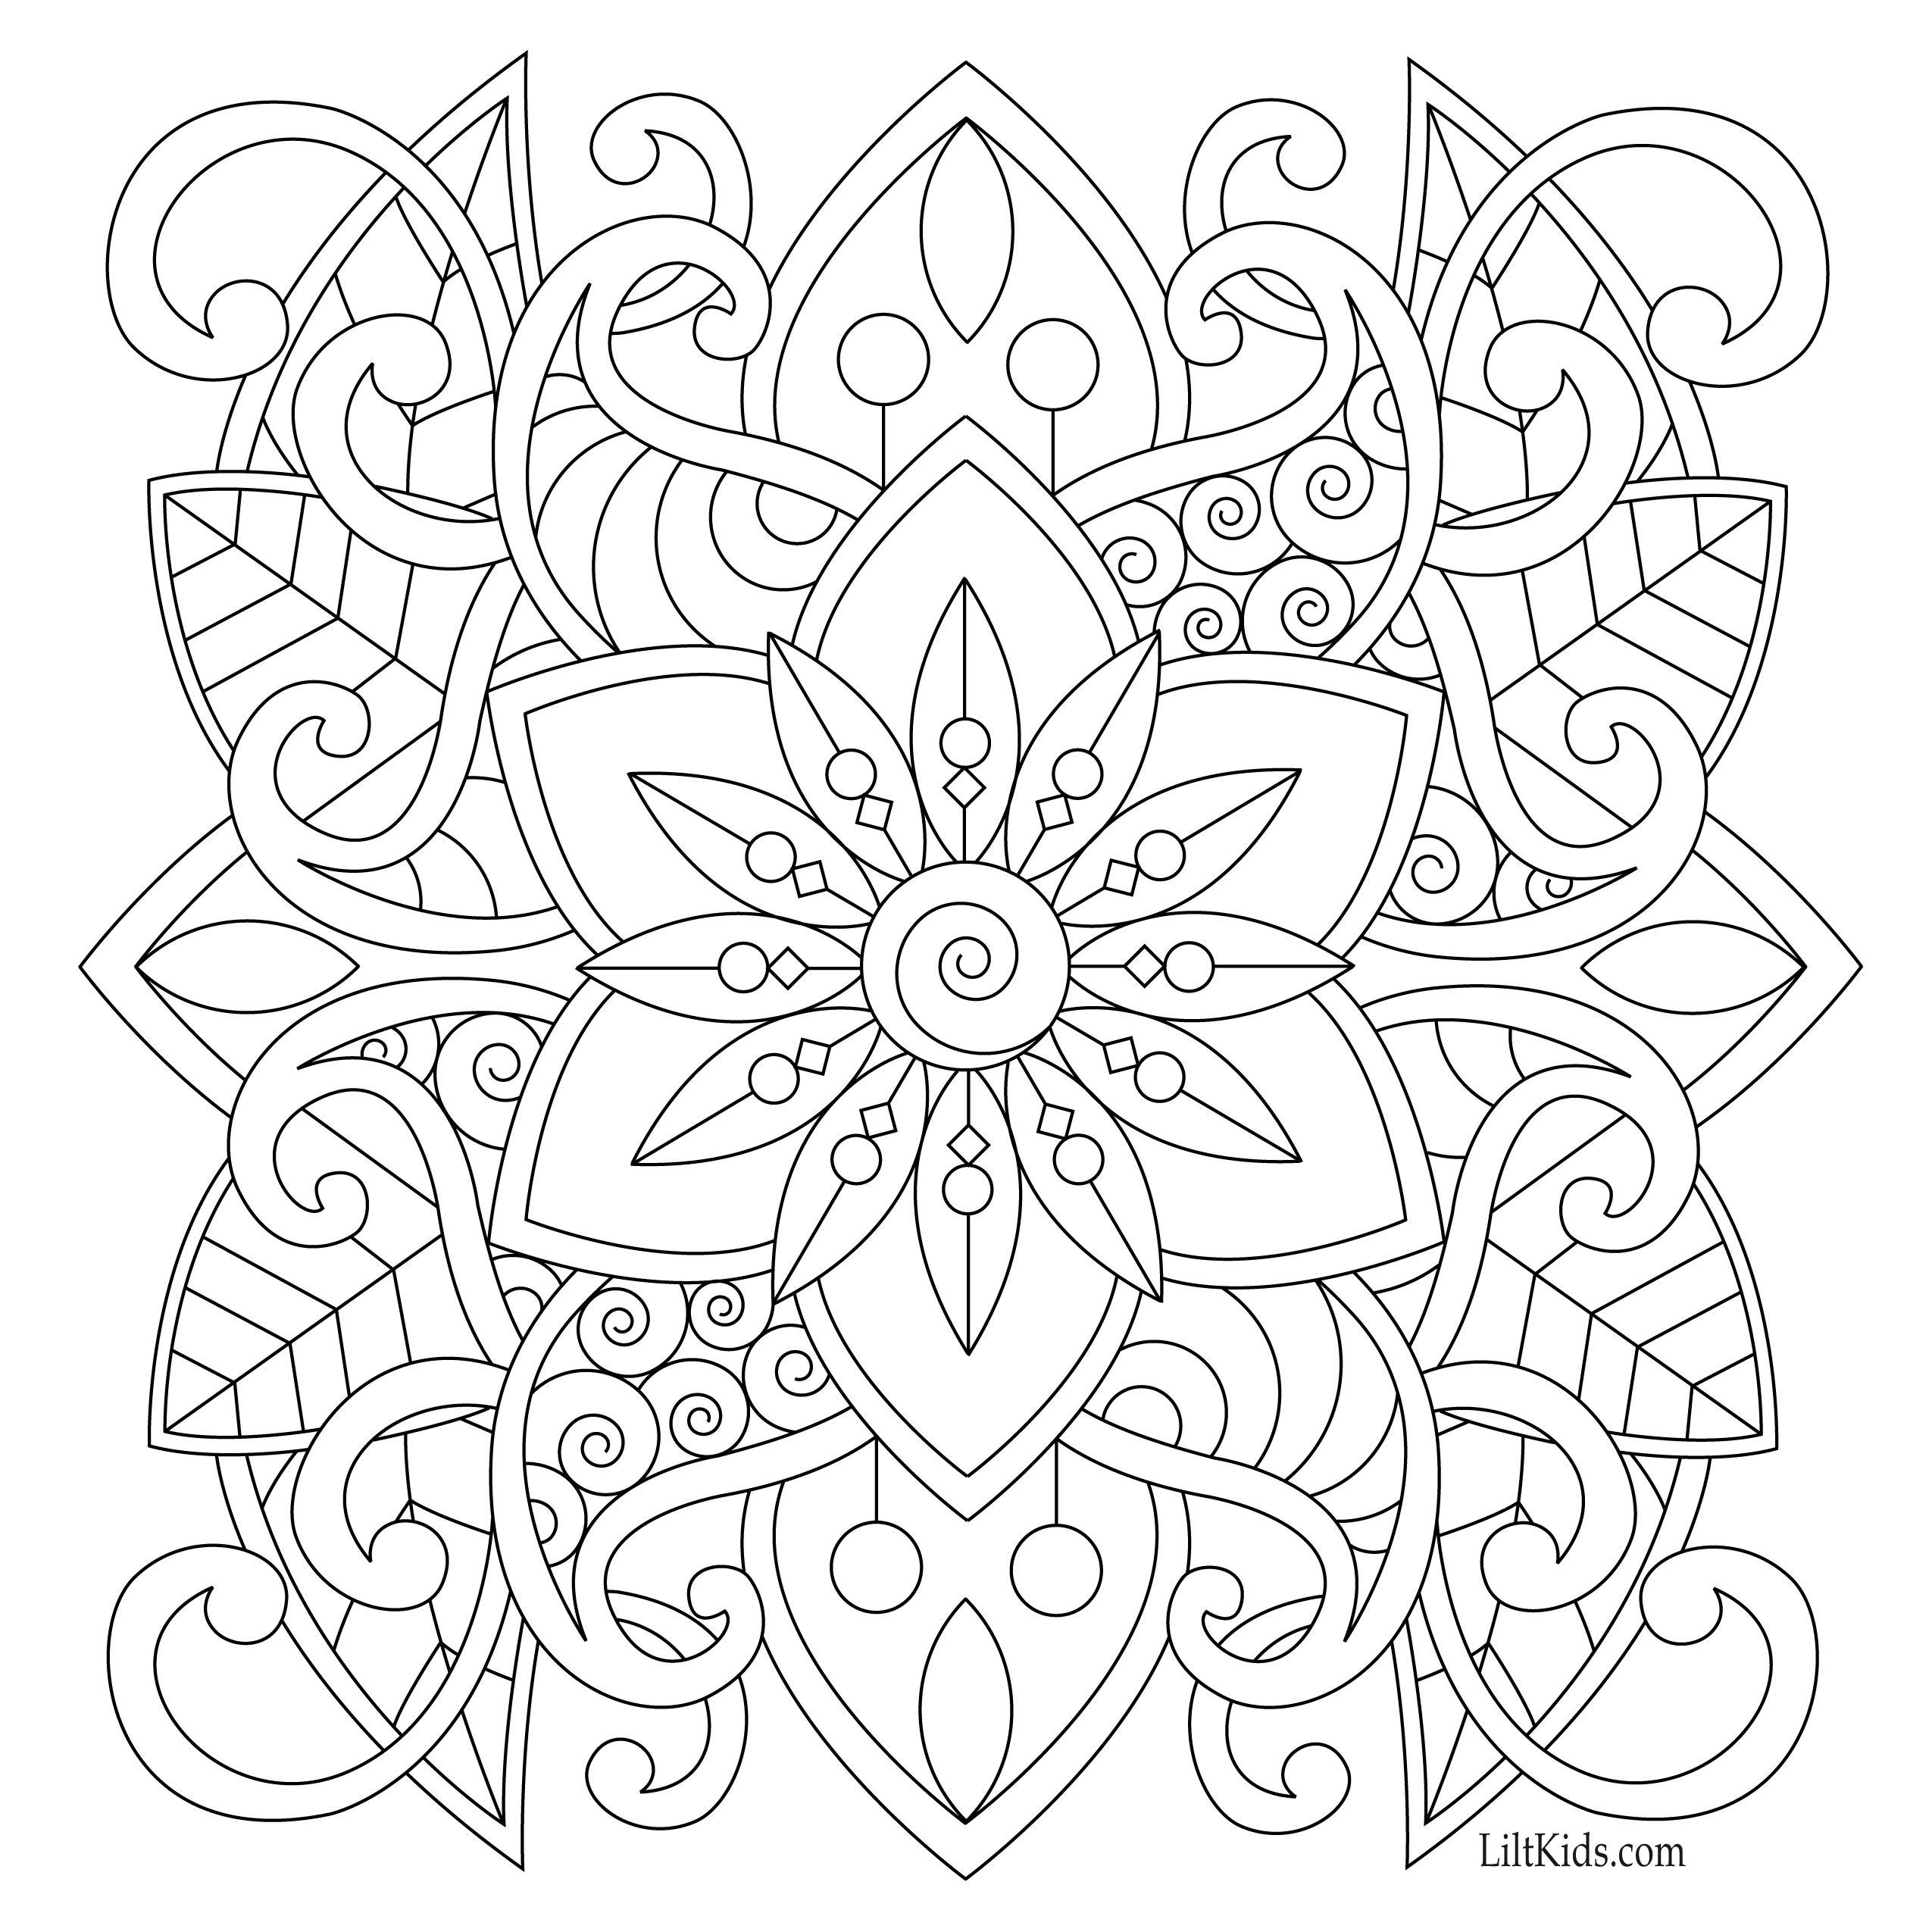 Simple Coloring Pages For Adults
 Free easy mandala for beginners adult coloring book image